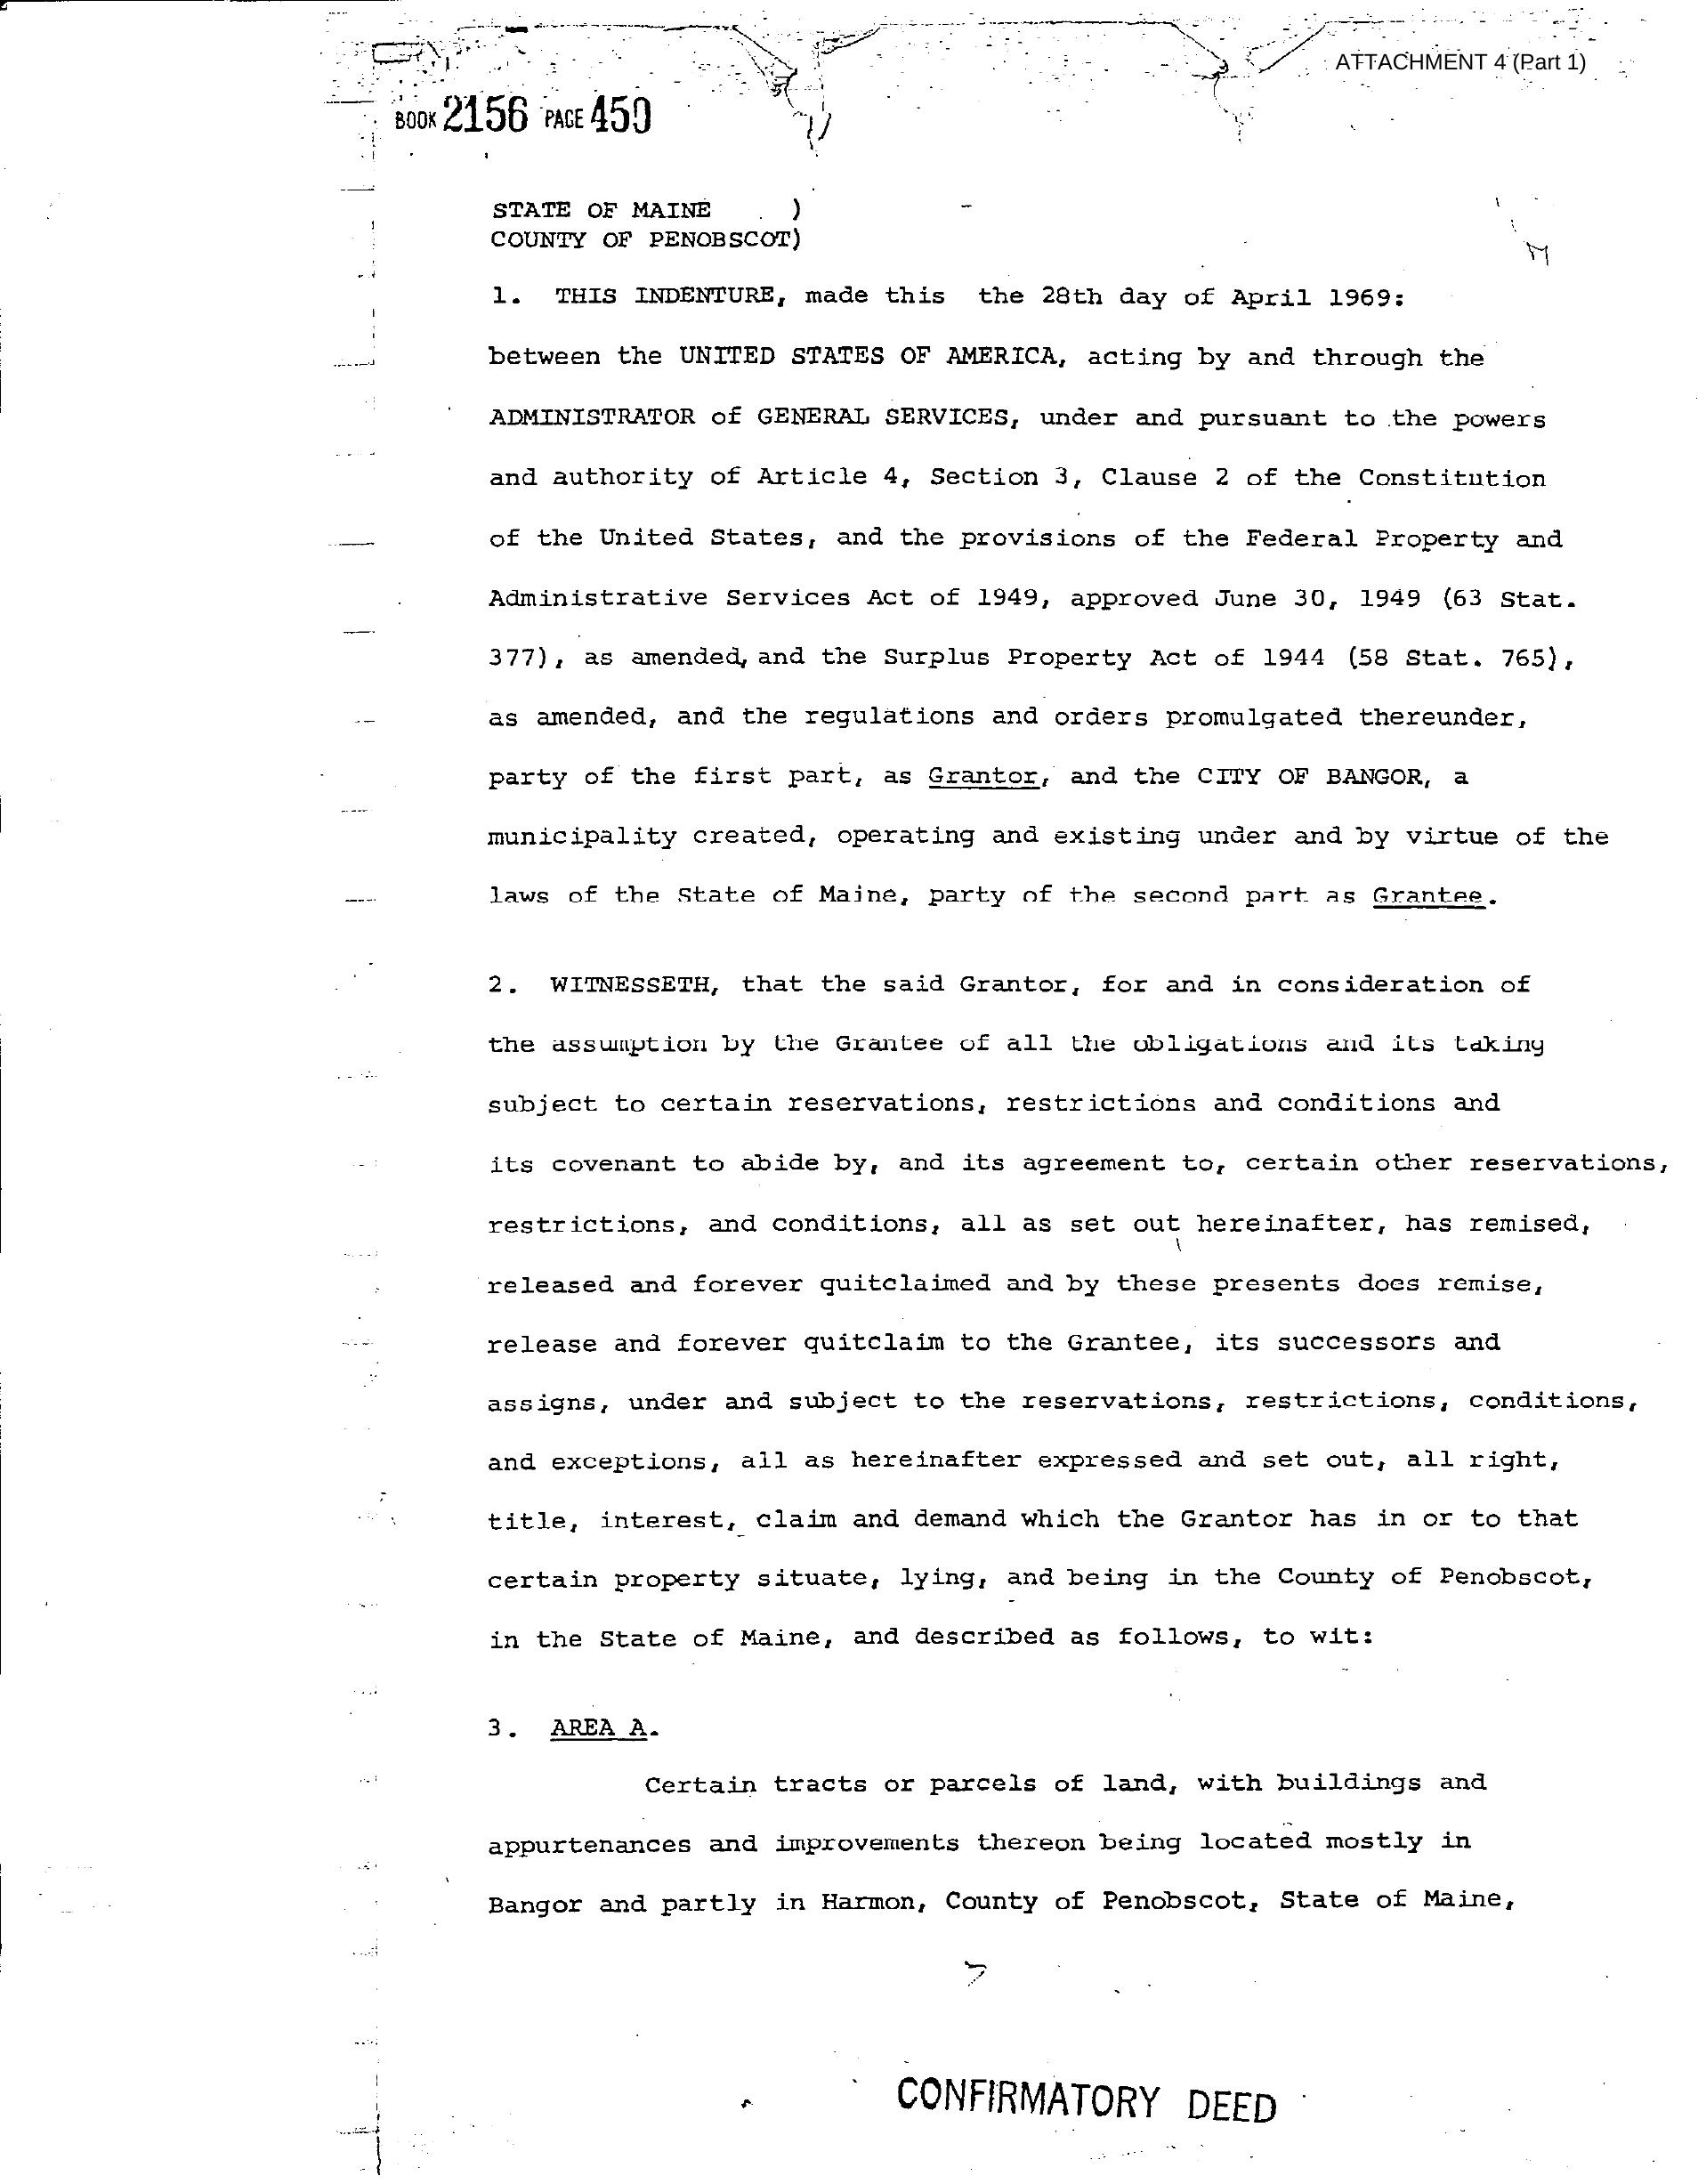 ATTACHMENT 4 (1969 FAA Deed Part 1)(reduced) by Unknown